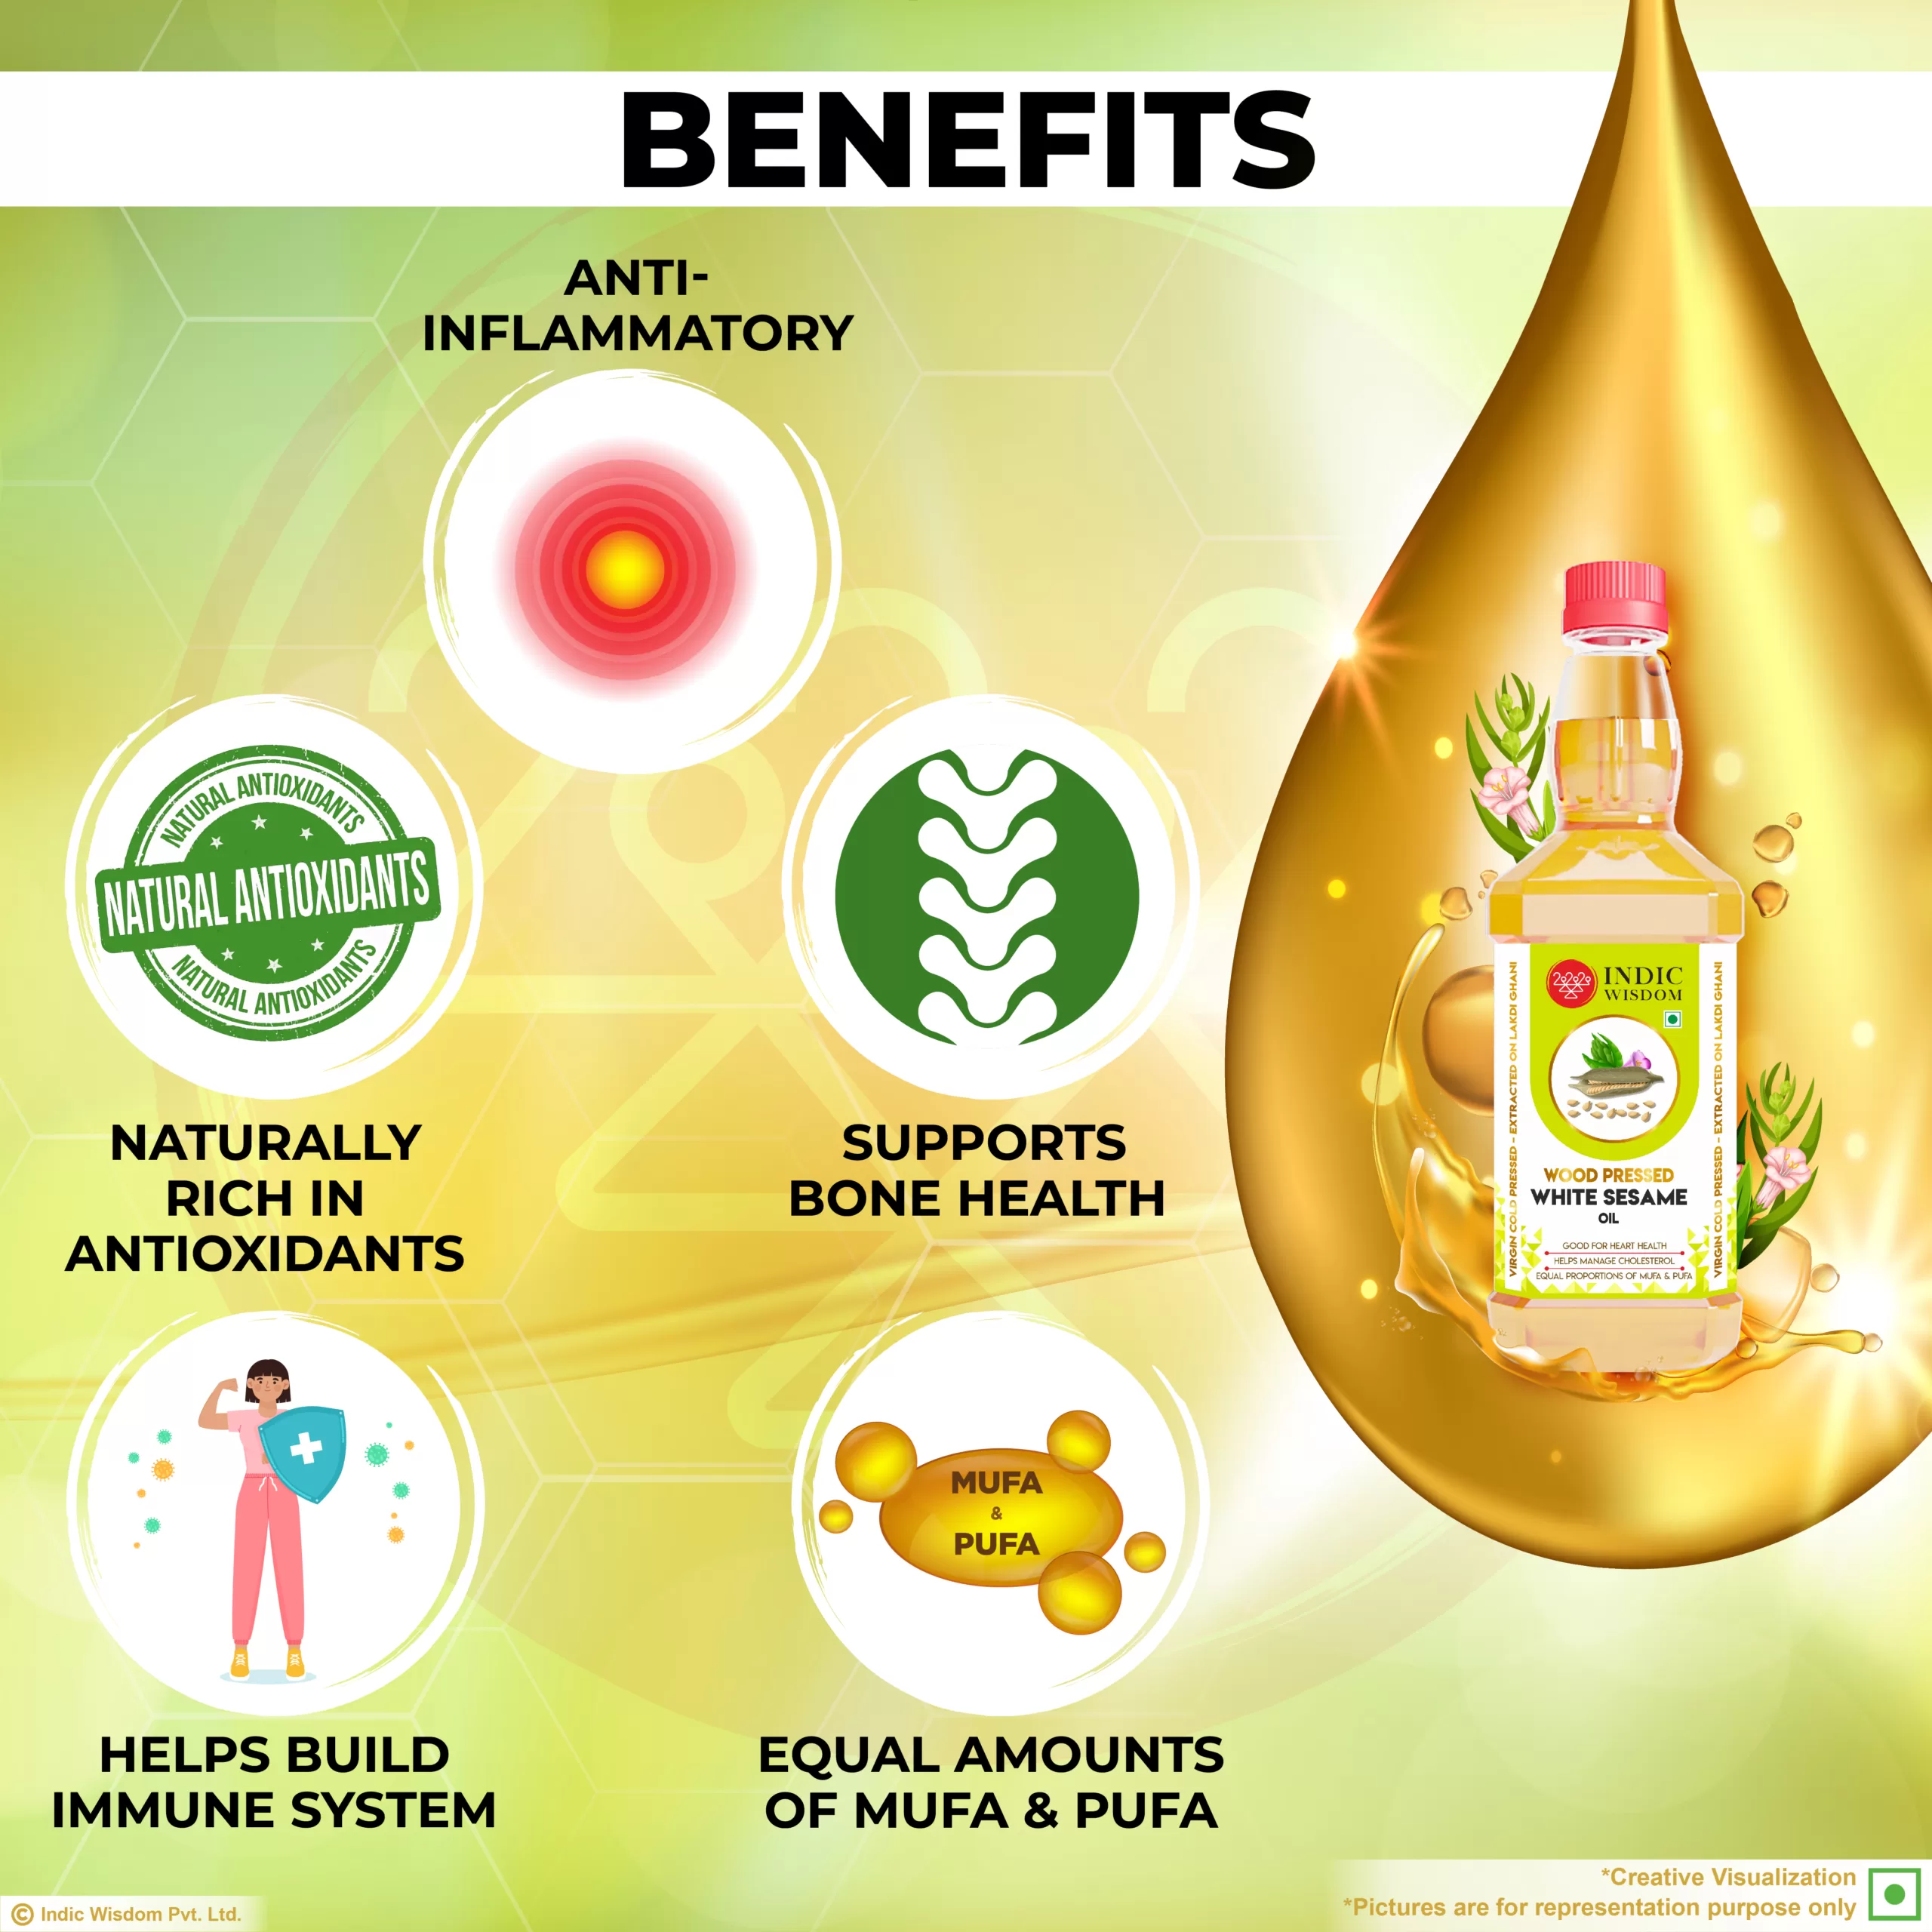 Benefits of wood pressed white sesame oil